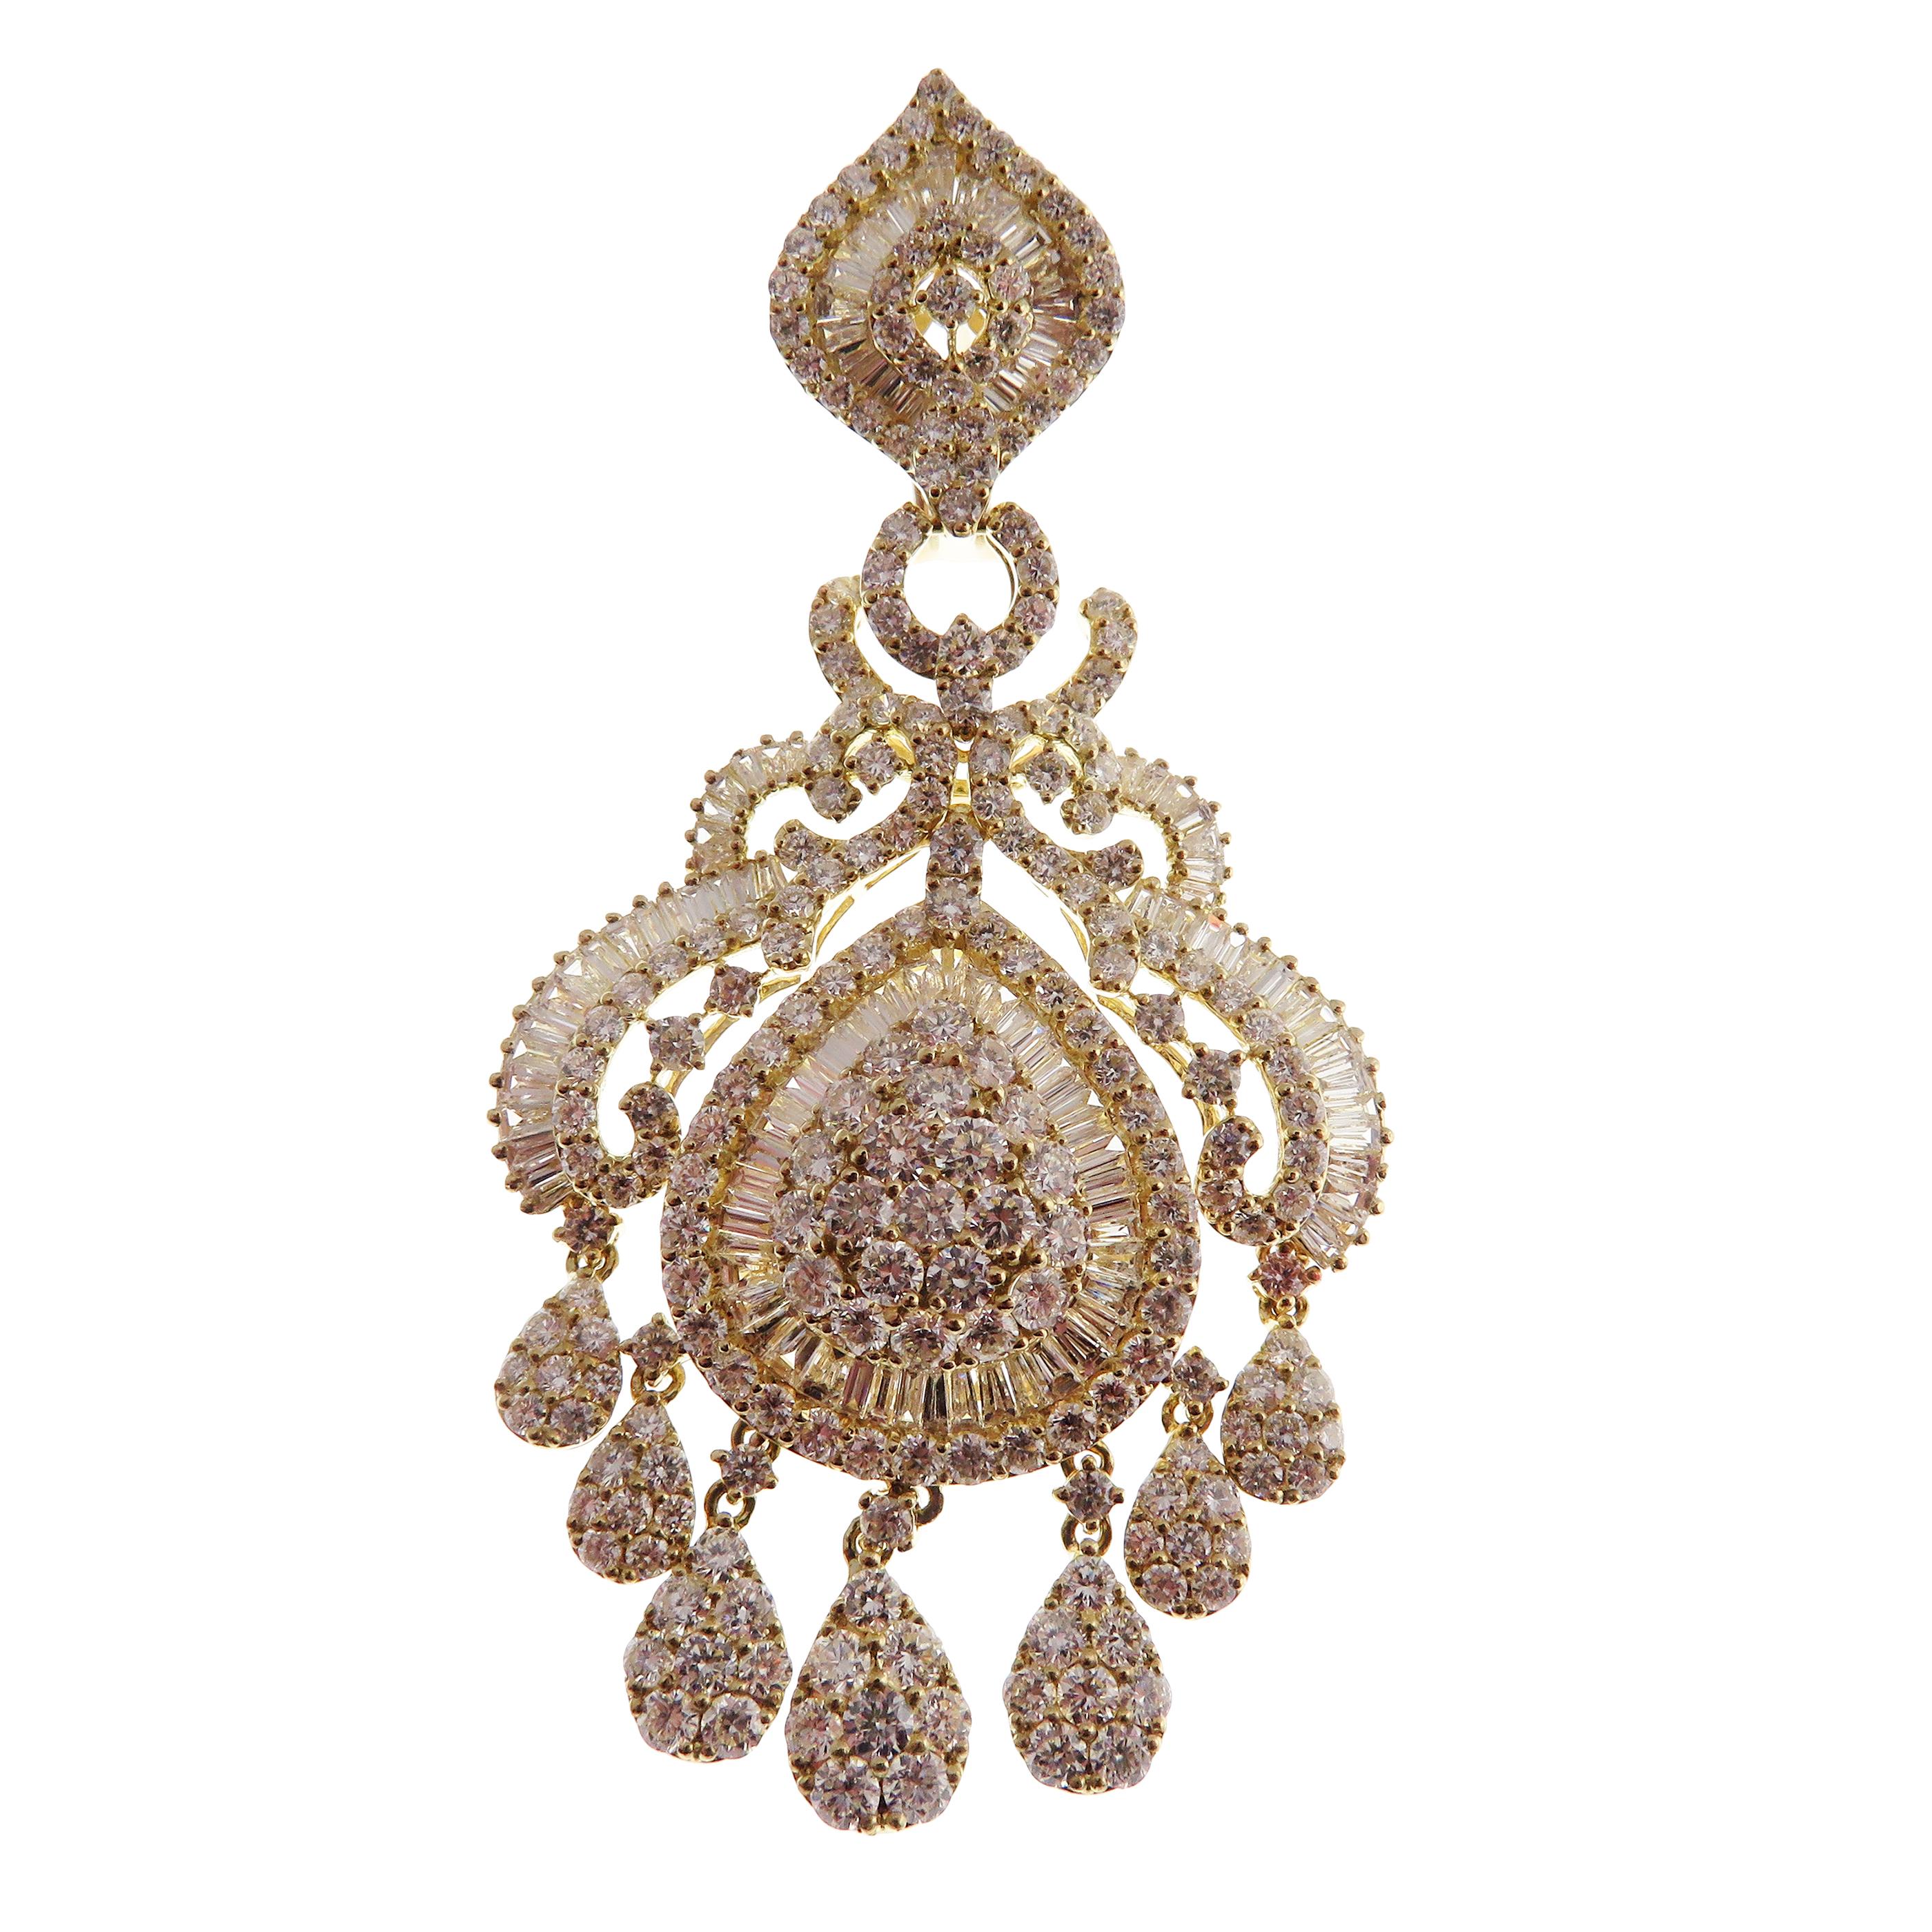 These ballroom pear chandelier earrings are crafted in 18-karat yellow gold, weighing approximately 15.22 total carats of SI-V Quality white diamond. French clip backing. 

Our Ballroom Chandelier Collection feature earrings for those with